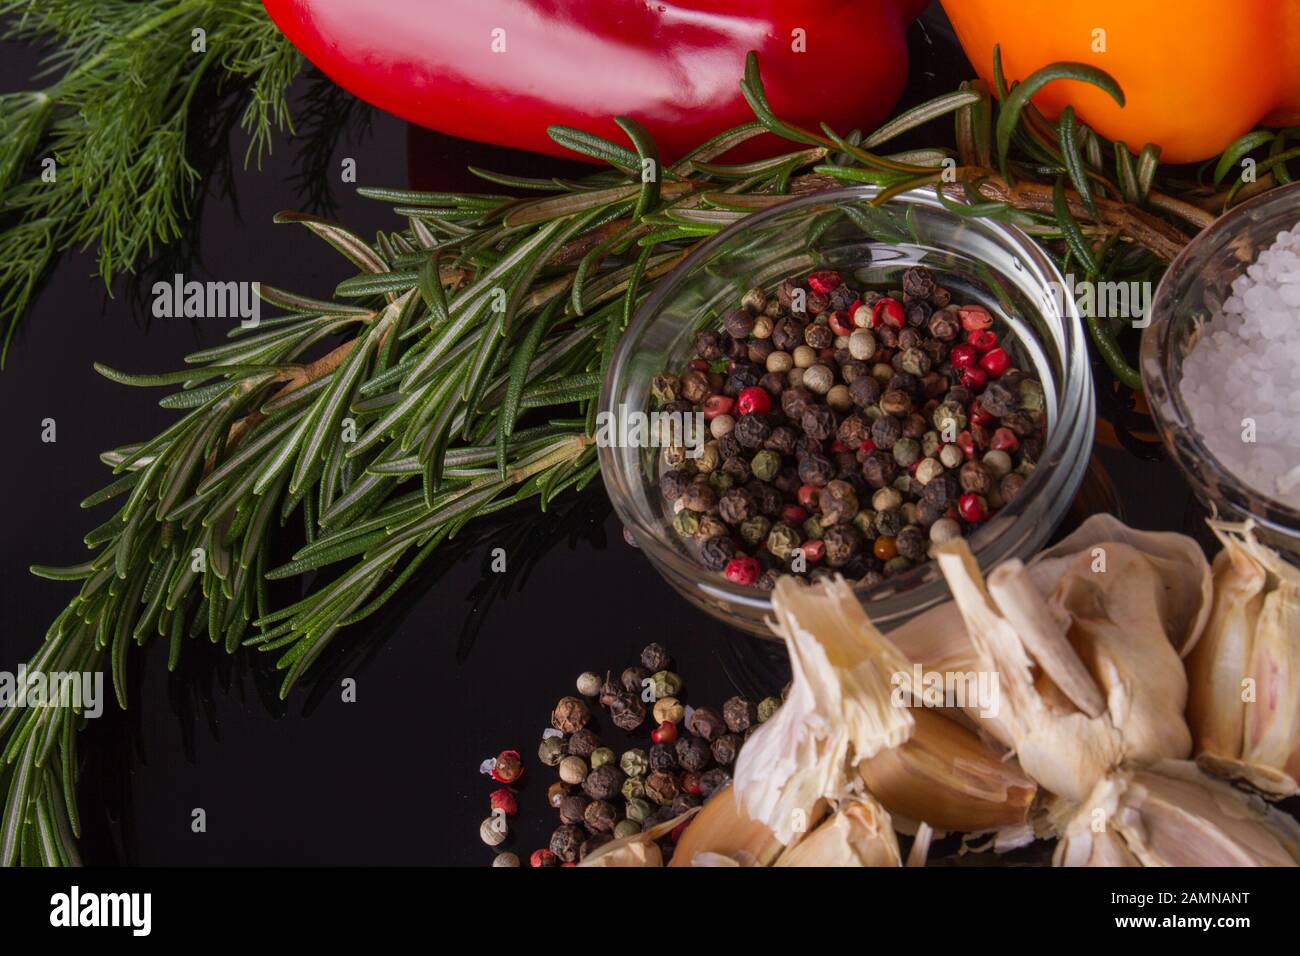 Rosemary and condiments close up. Stock Photo